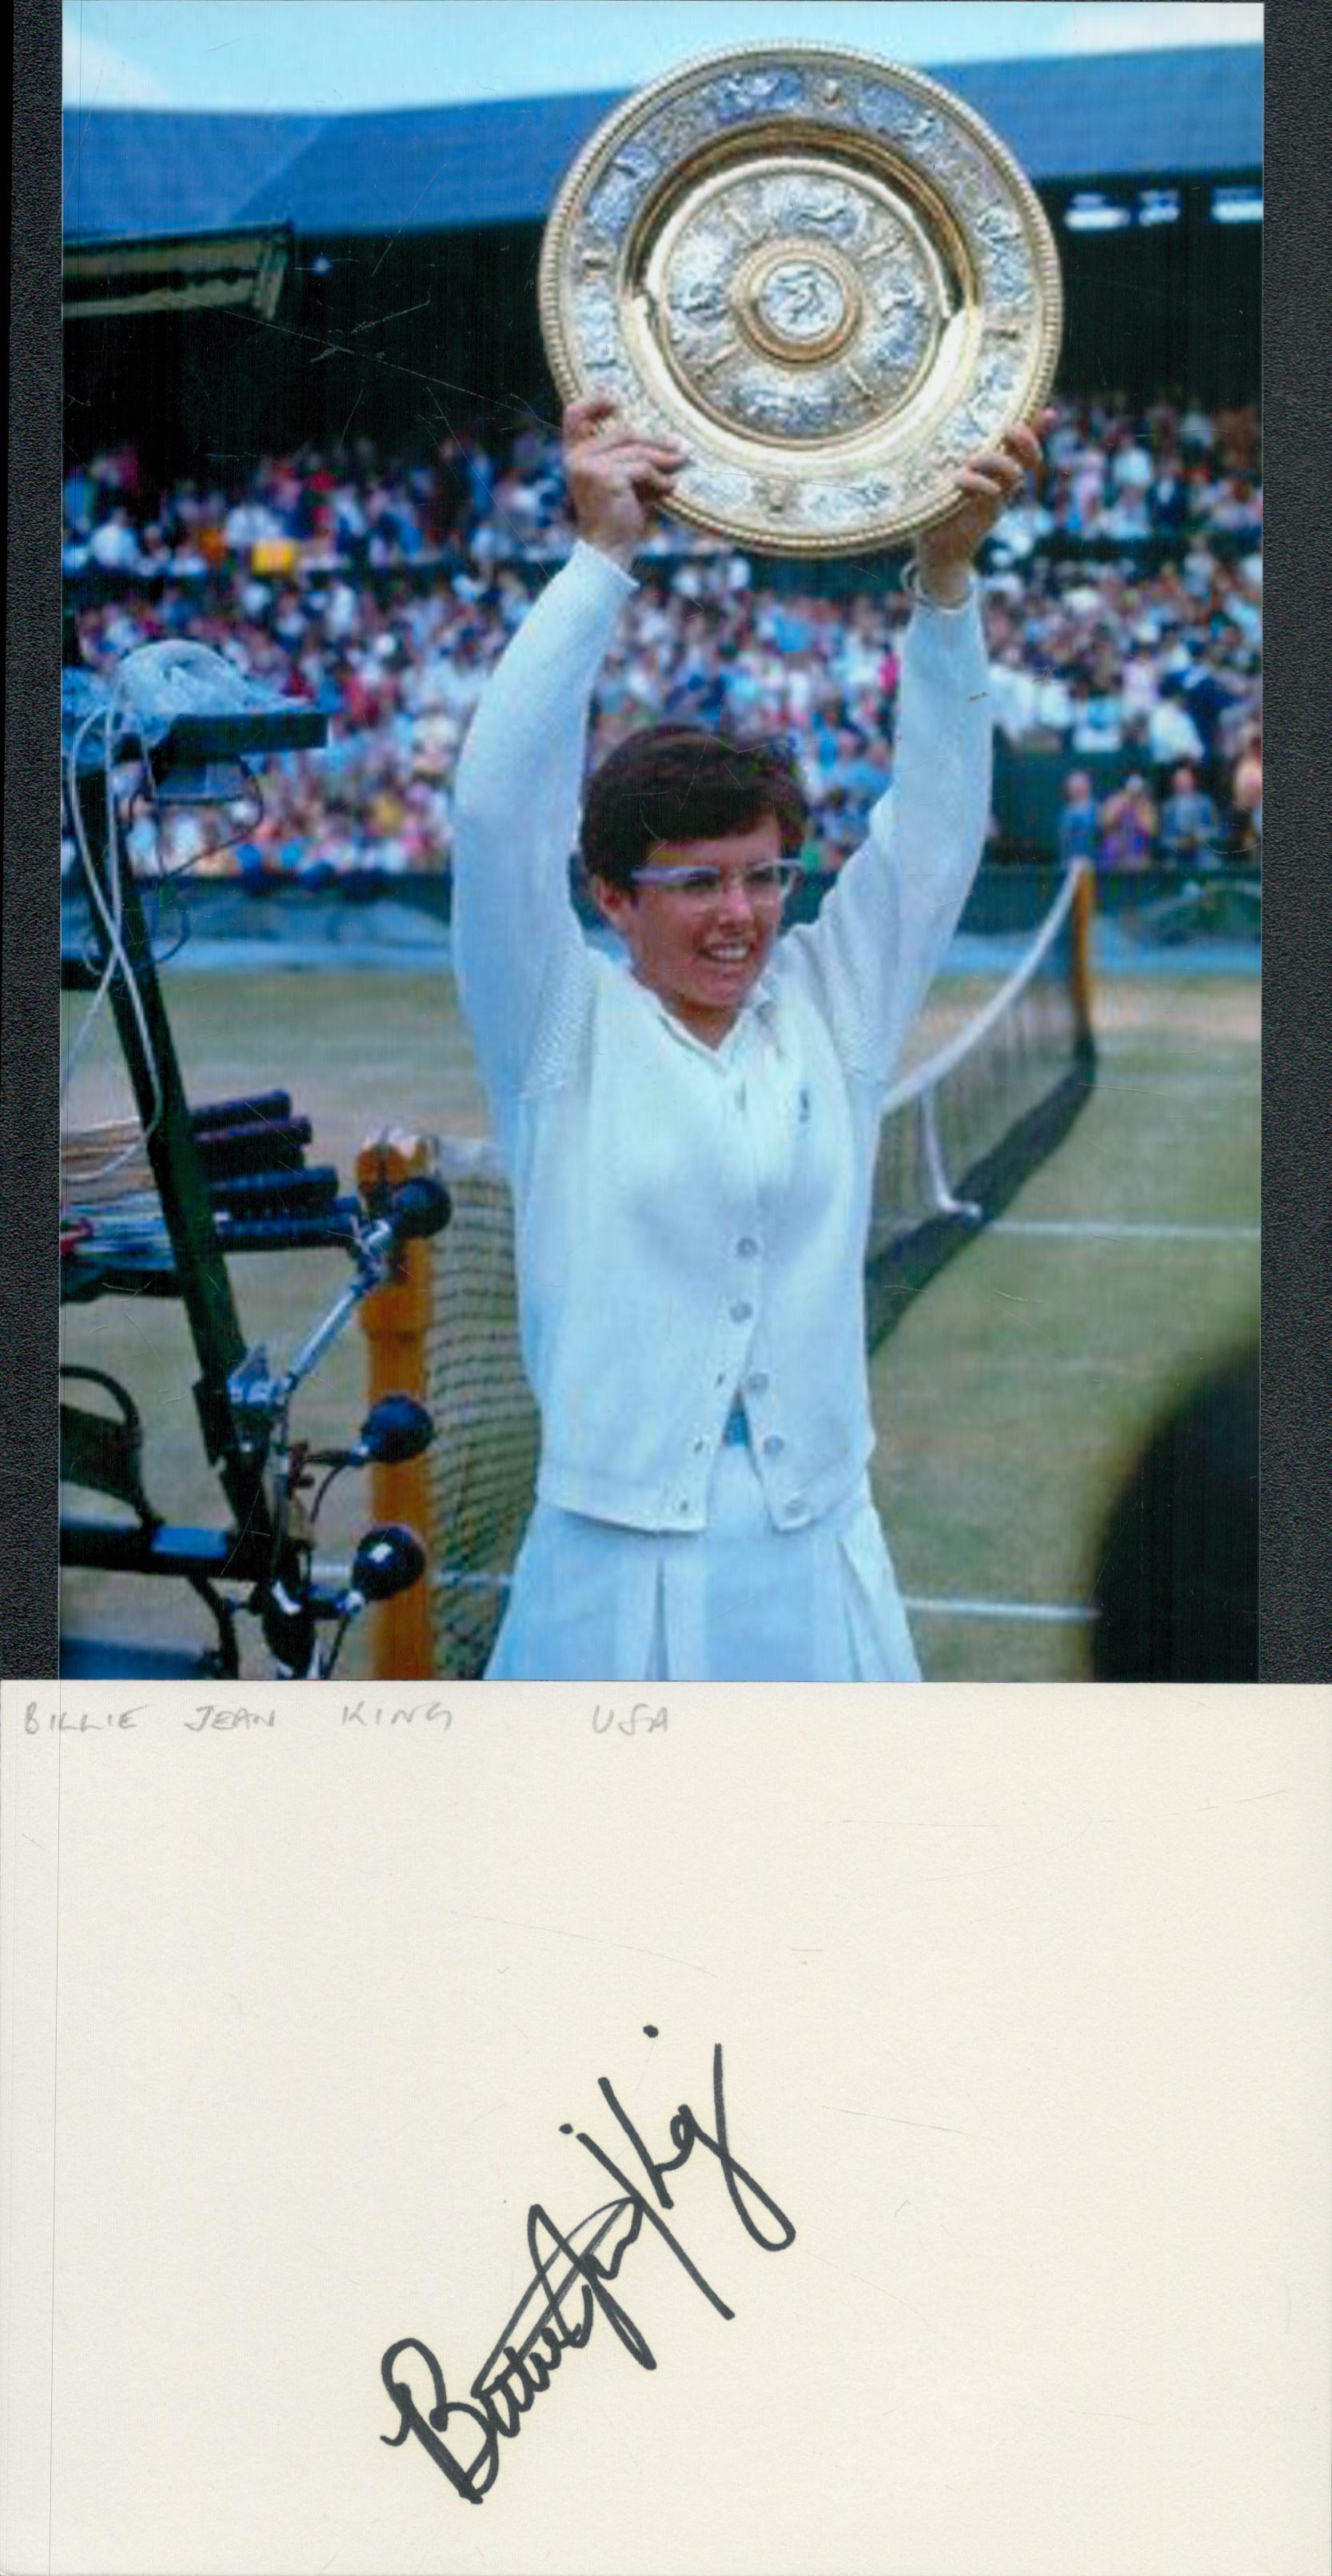 BILLIE JEAN KING Tennis Legend signed card with Wimbledon Open Photo . Good Condition. All